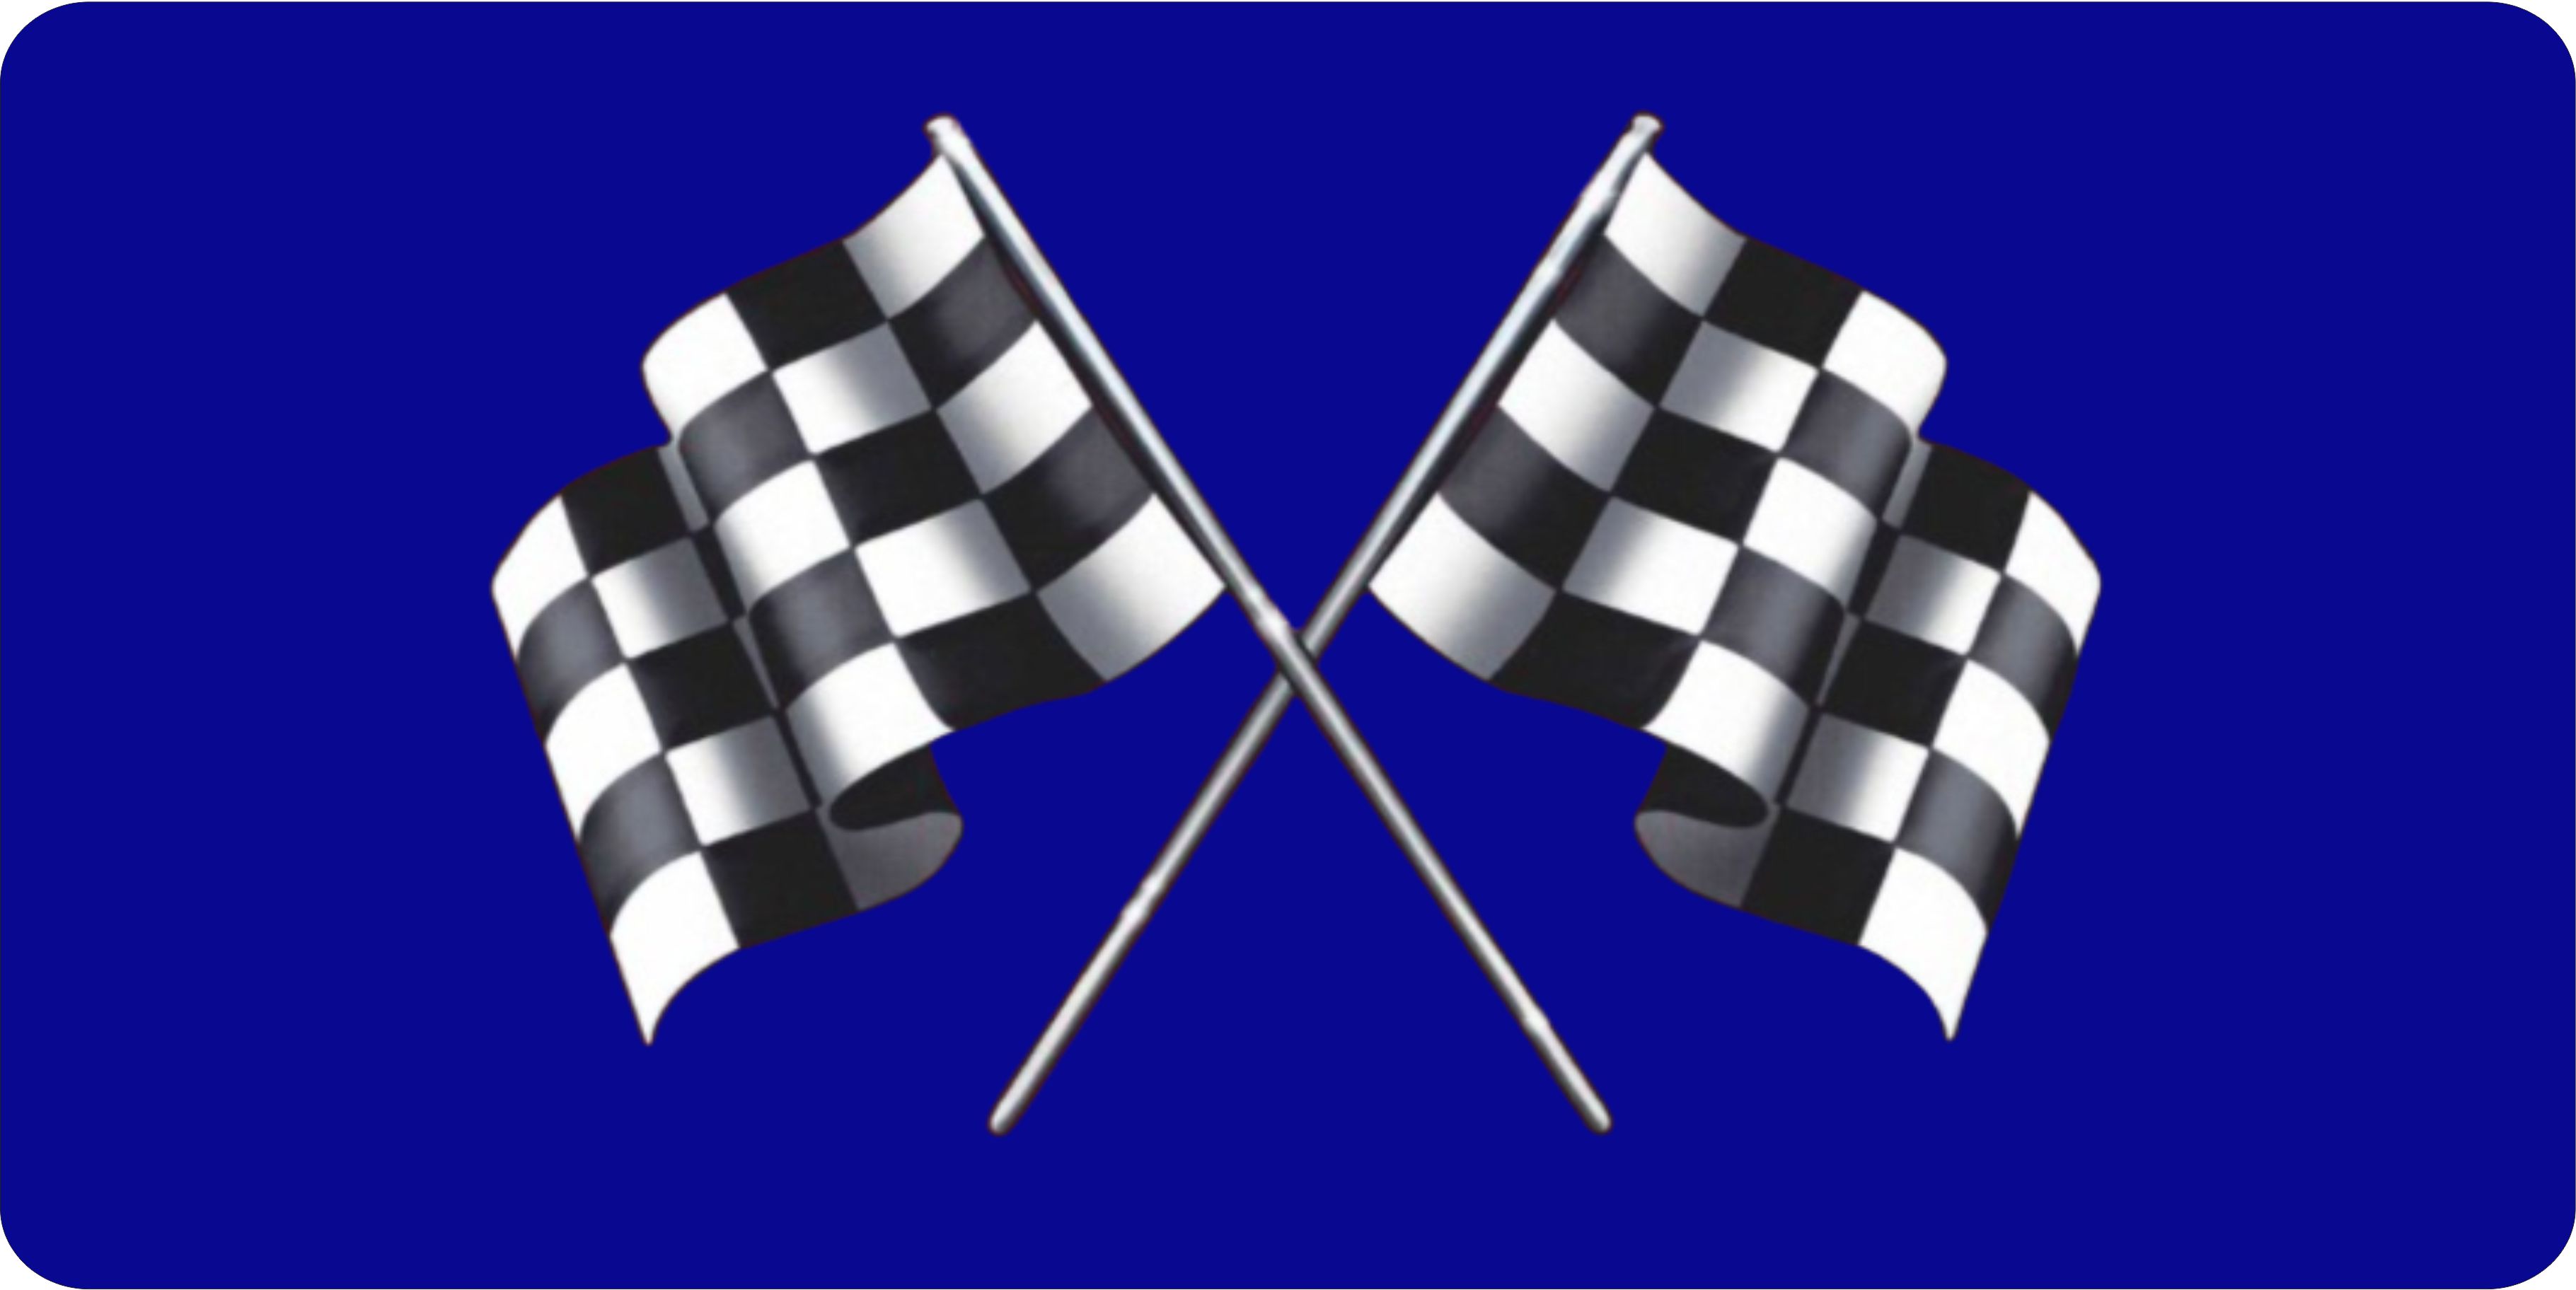 Racing FLAGs On Navy Blue Photo License Plate